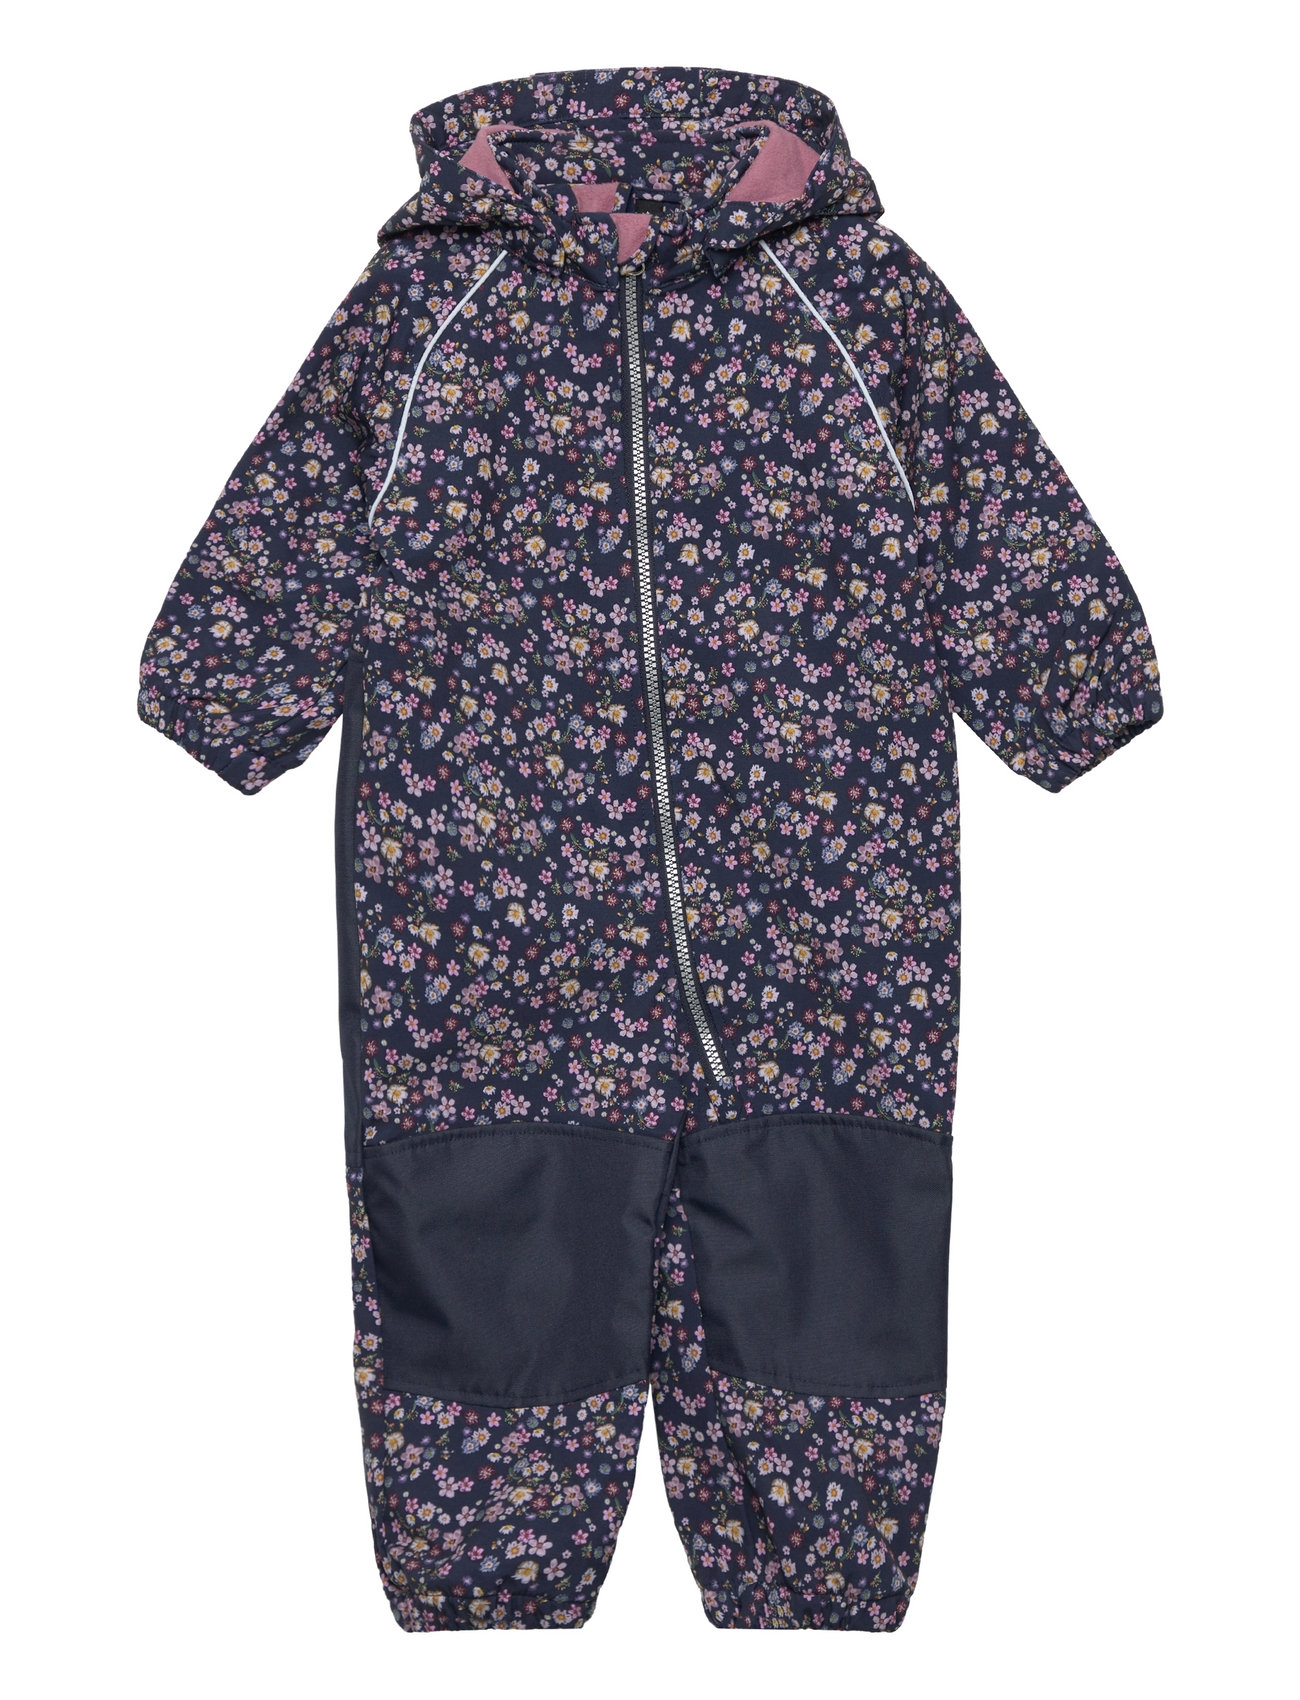 Buy it name - delivery online 28.50 Flower returns and easy from Suit it name Nmfalfa08 Coveralls Liberty at Boozt.com. Fast €. Fo